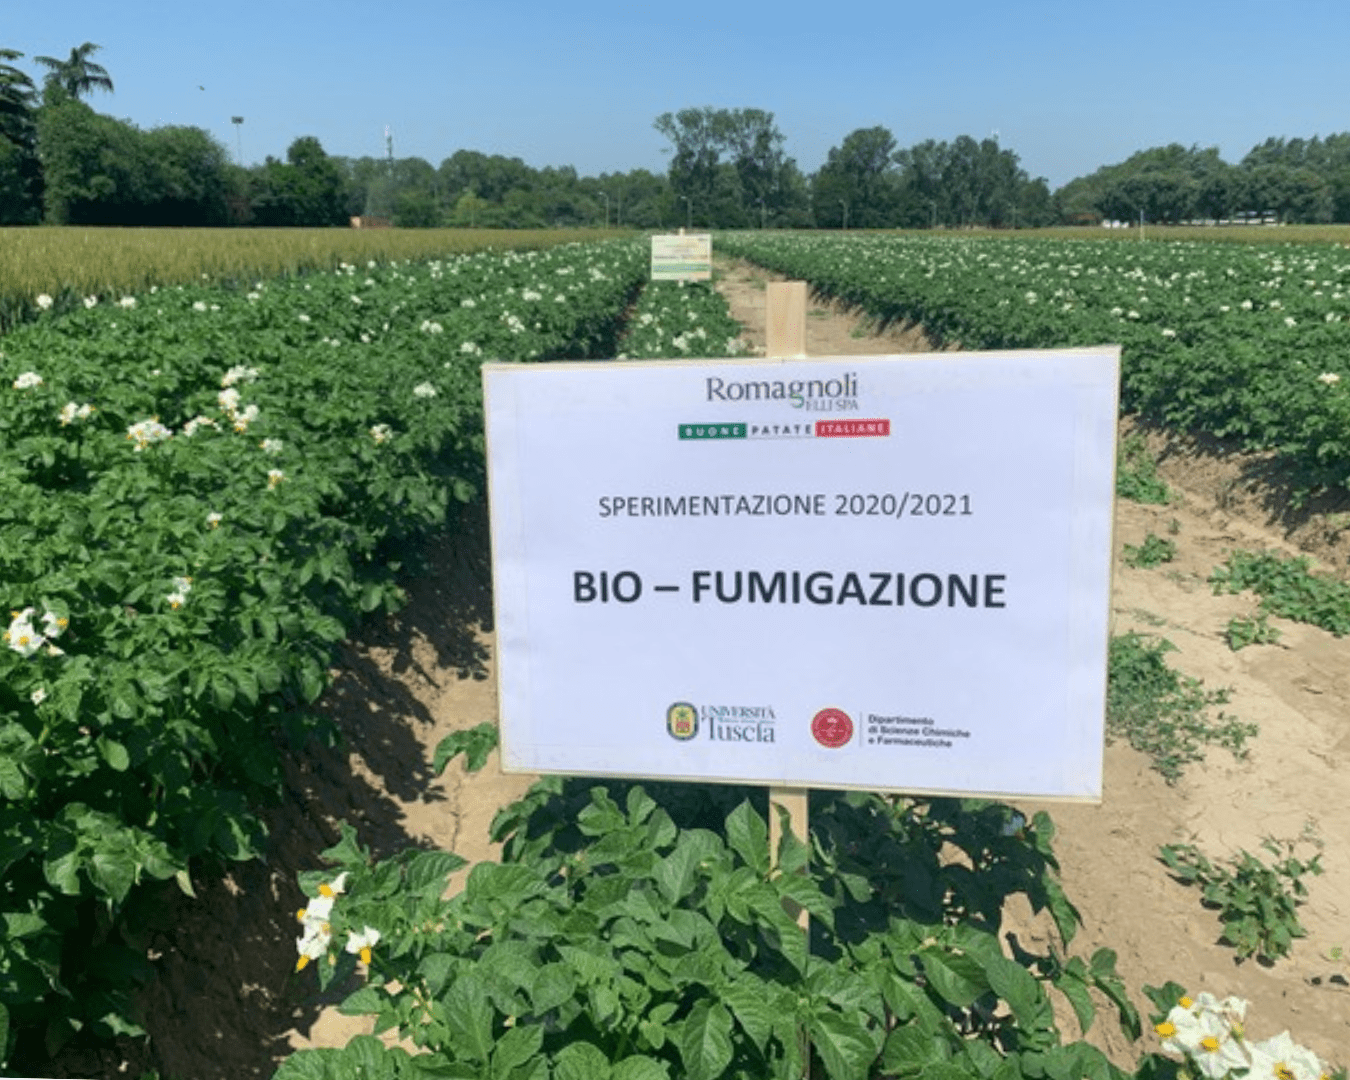 Field trials continue for sustainable agriculture